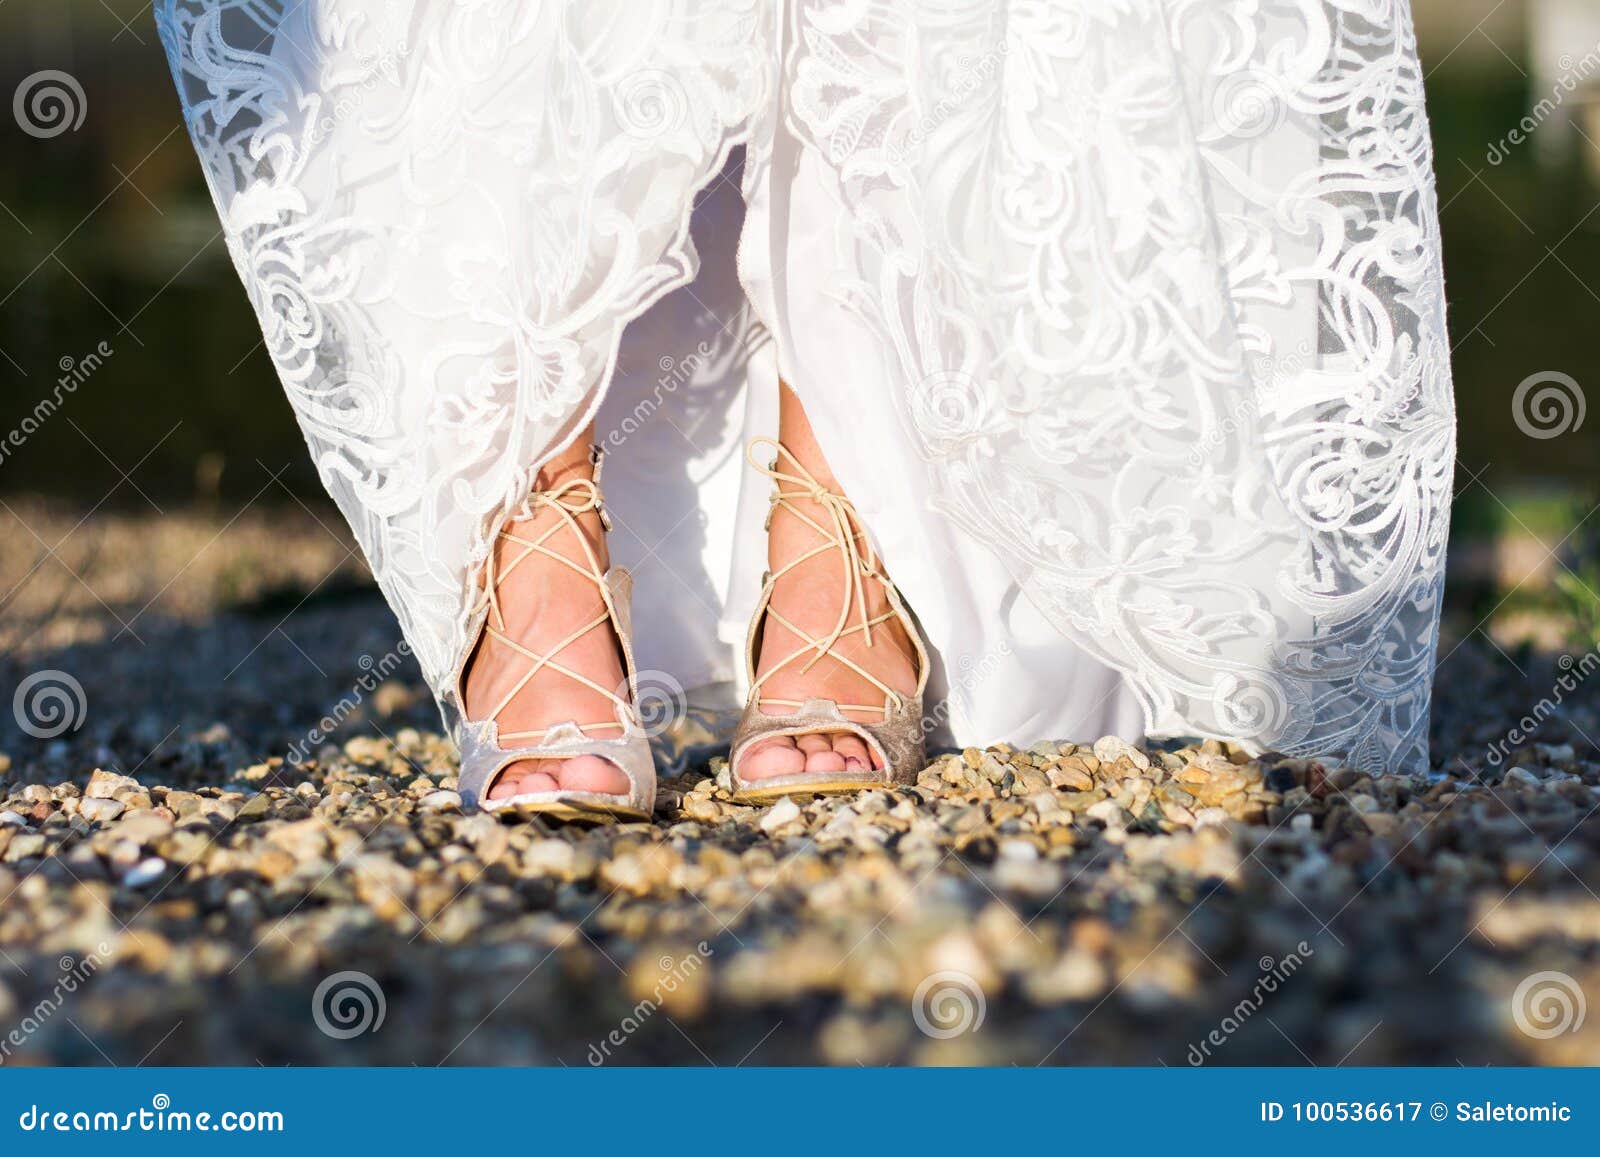 Feet of a Bride in Wedding Dress Stock Image - Image of adult, feet ...